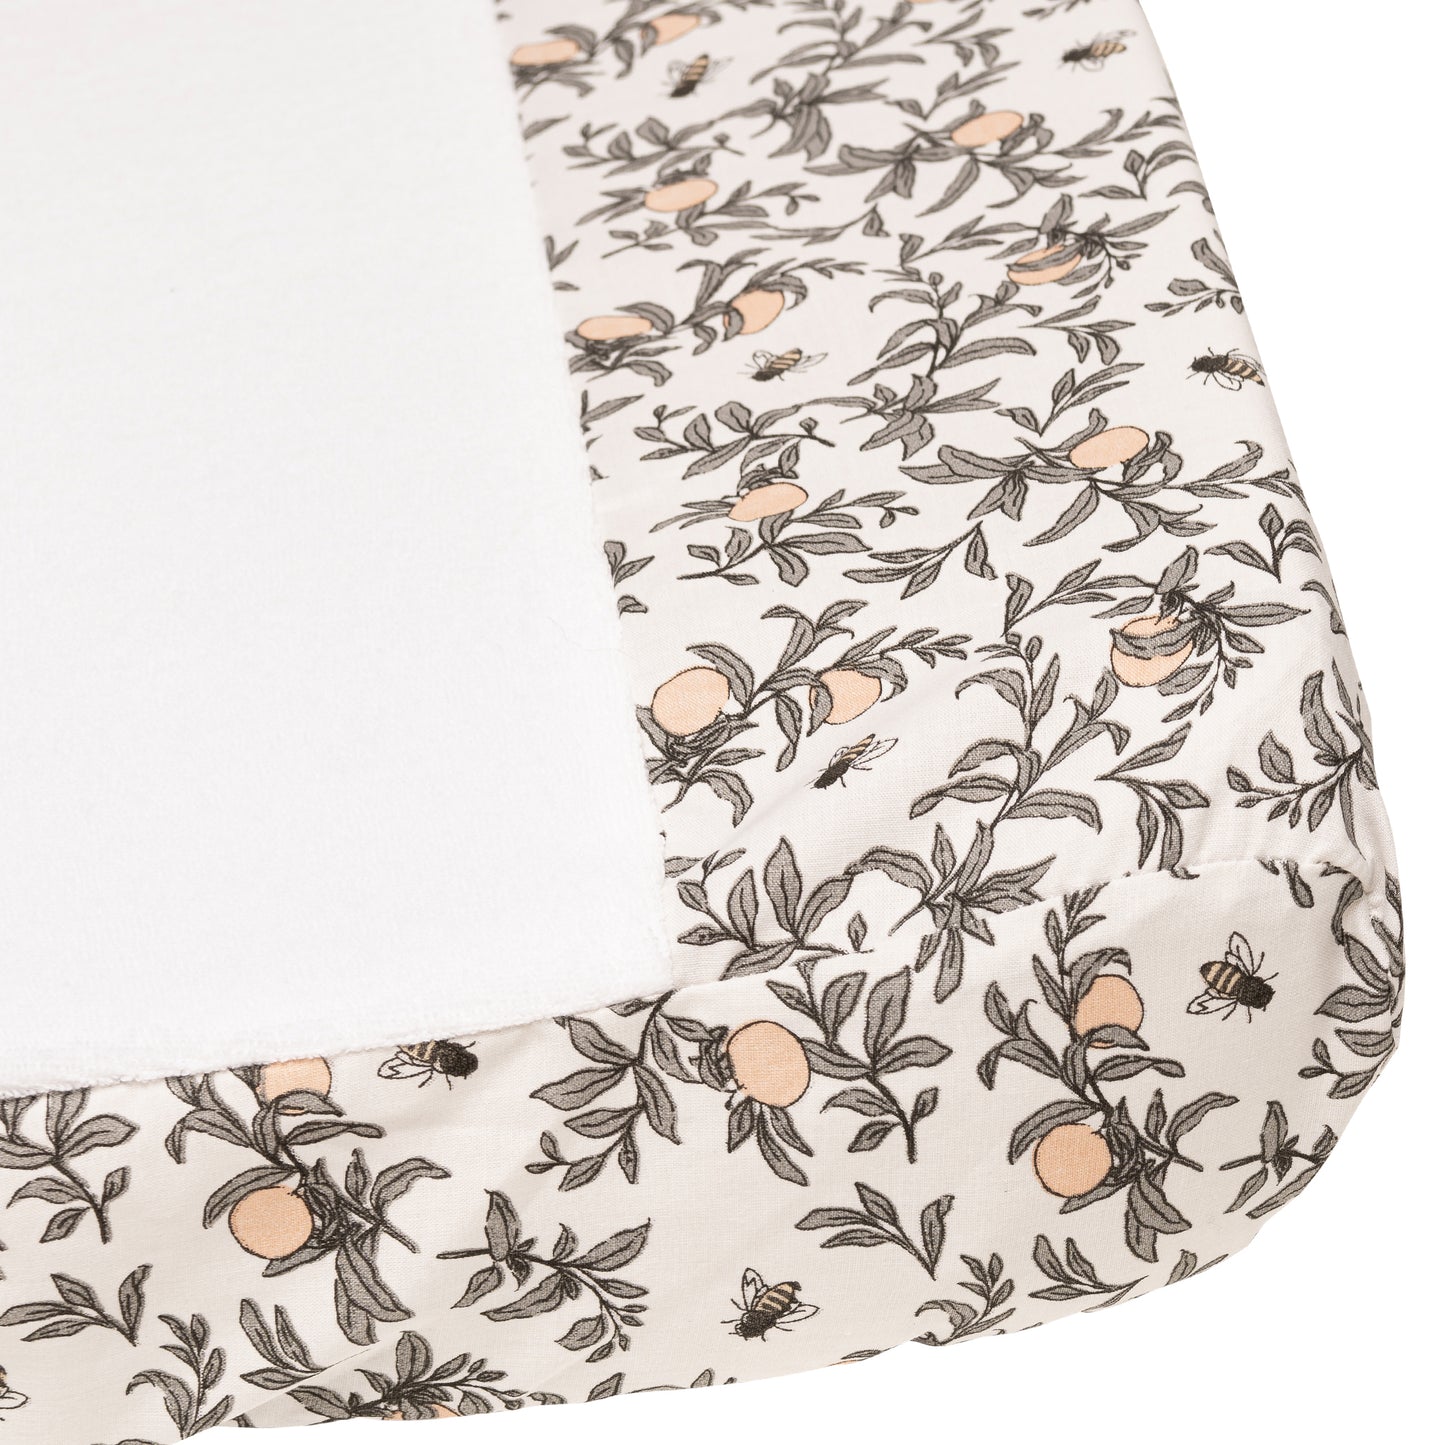 Change pad cover - Honeybees by Solange Pilote